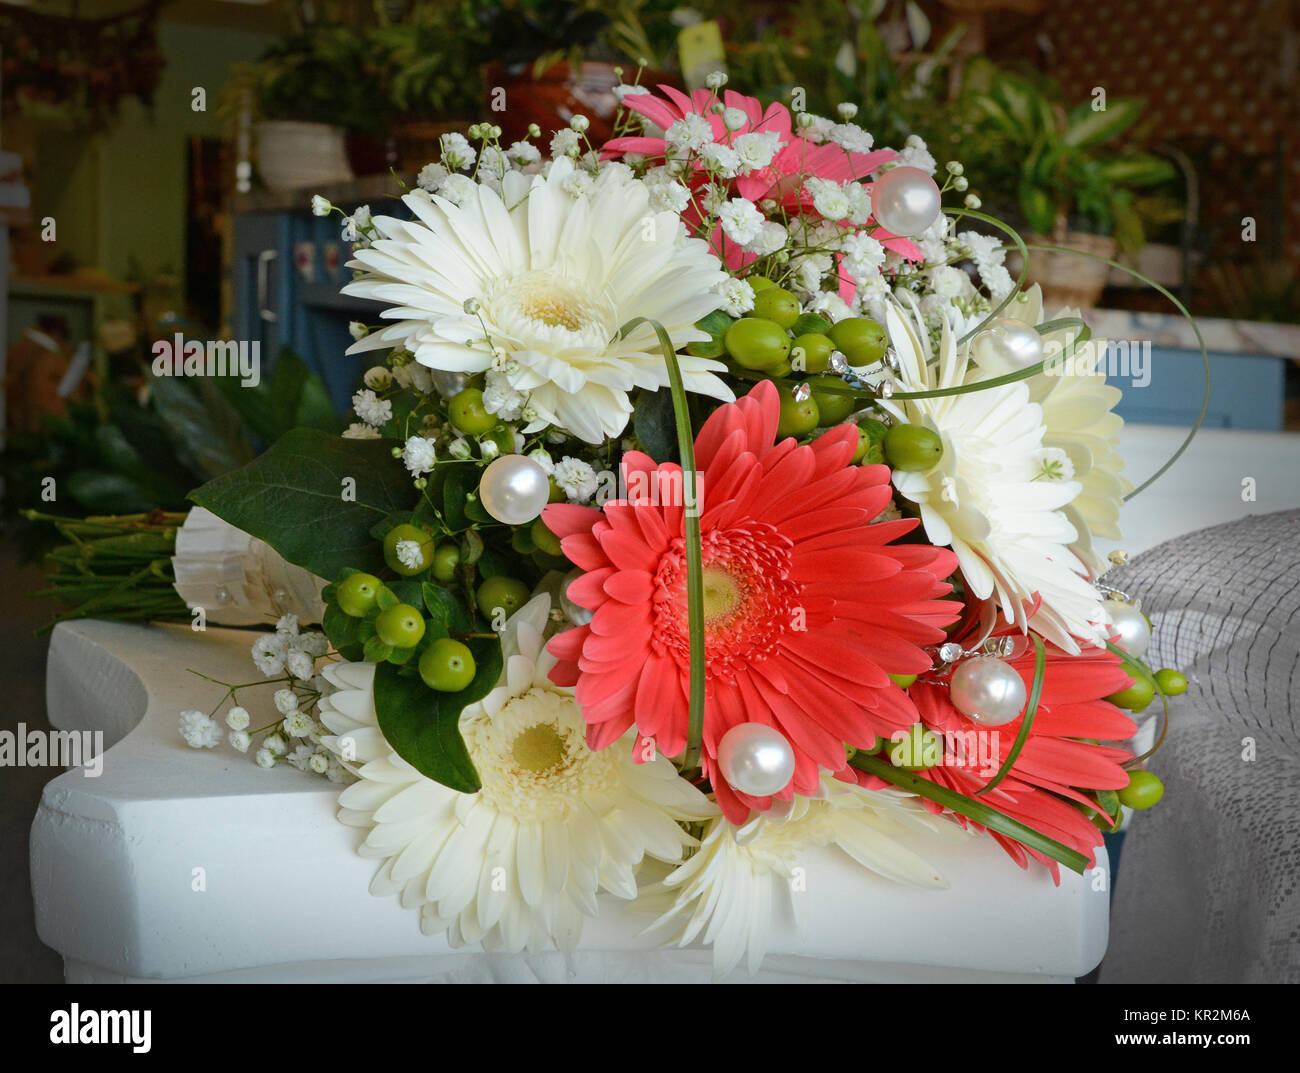 Photo of a festive, coral and white bridal bouquet with gerbera daisies, hydrangea, hypericum berries, baby's breath, grass loops and big fun pearls. Stock Photo